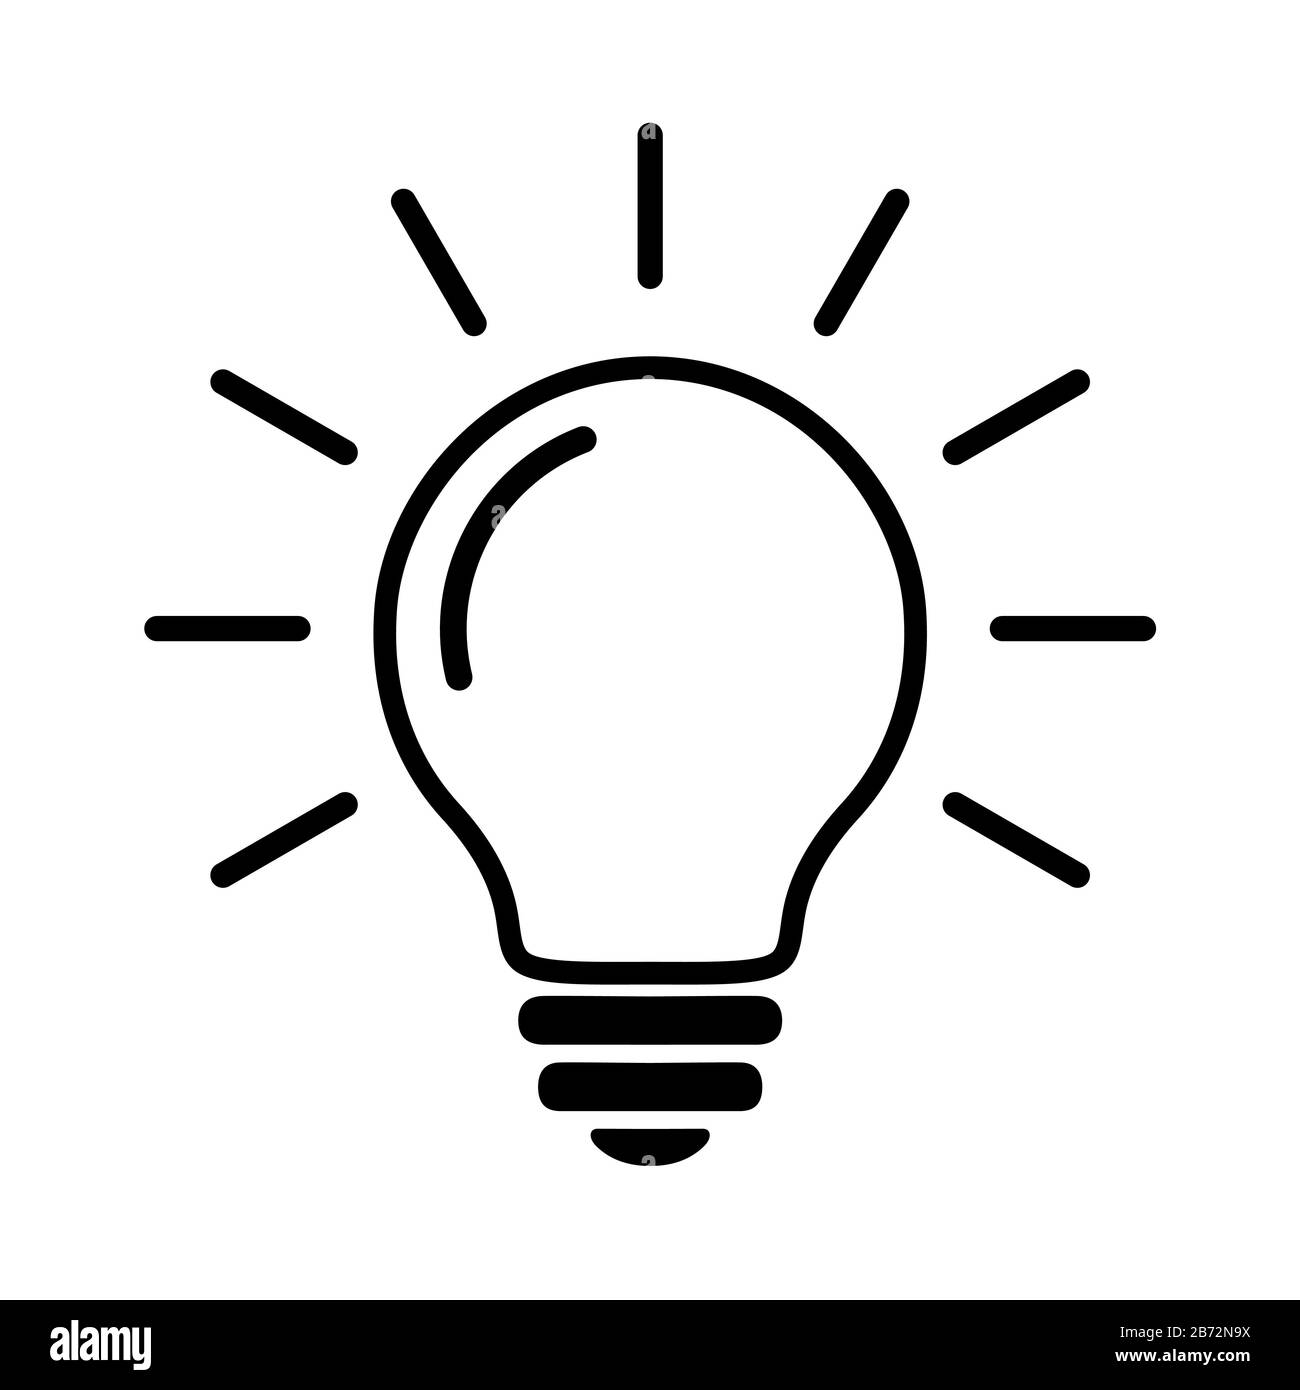 https://c8.alamy.com/comp/2B72N9X/light-bulb-line-flat-icon-lighting-electric-lamp-with-rays-simple-black-pictogram-vector-graphic-design-element-isolated-on-white-background-2B72N9X.jpg